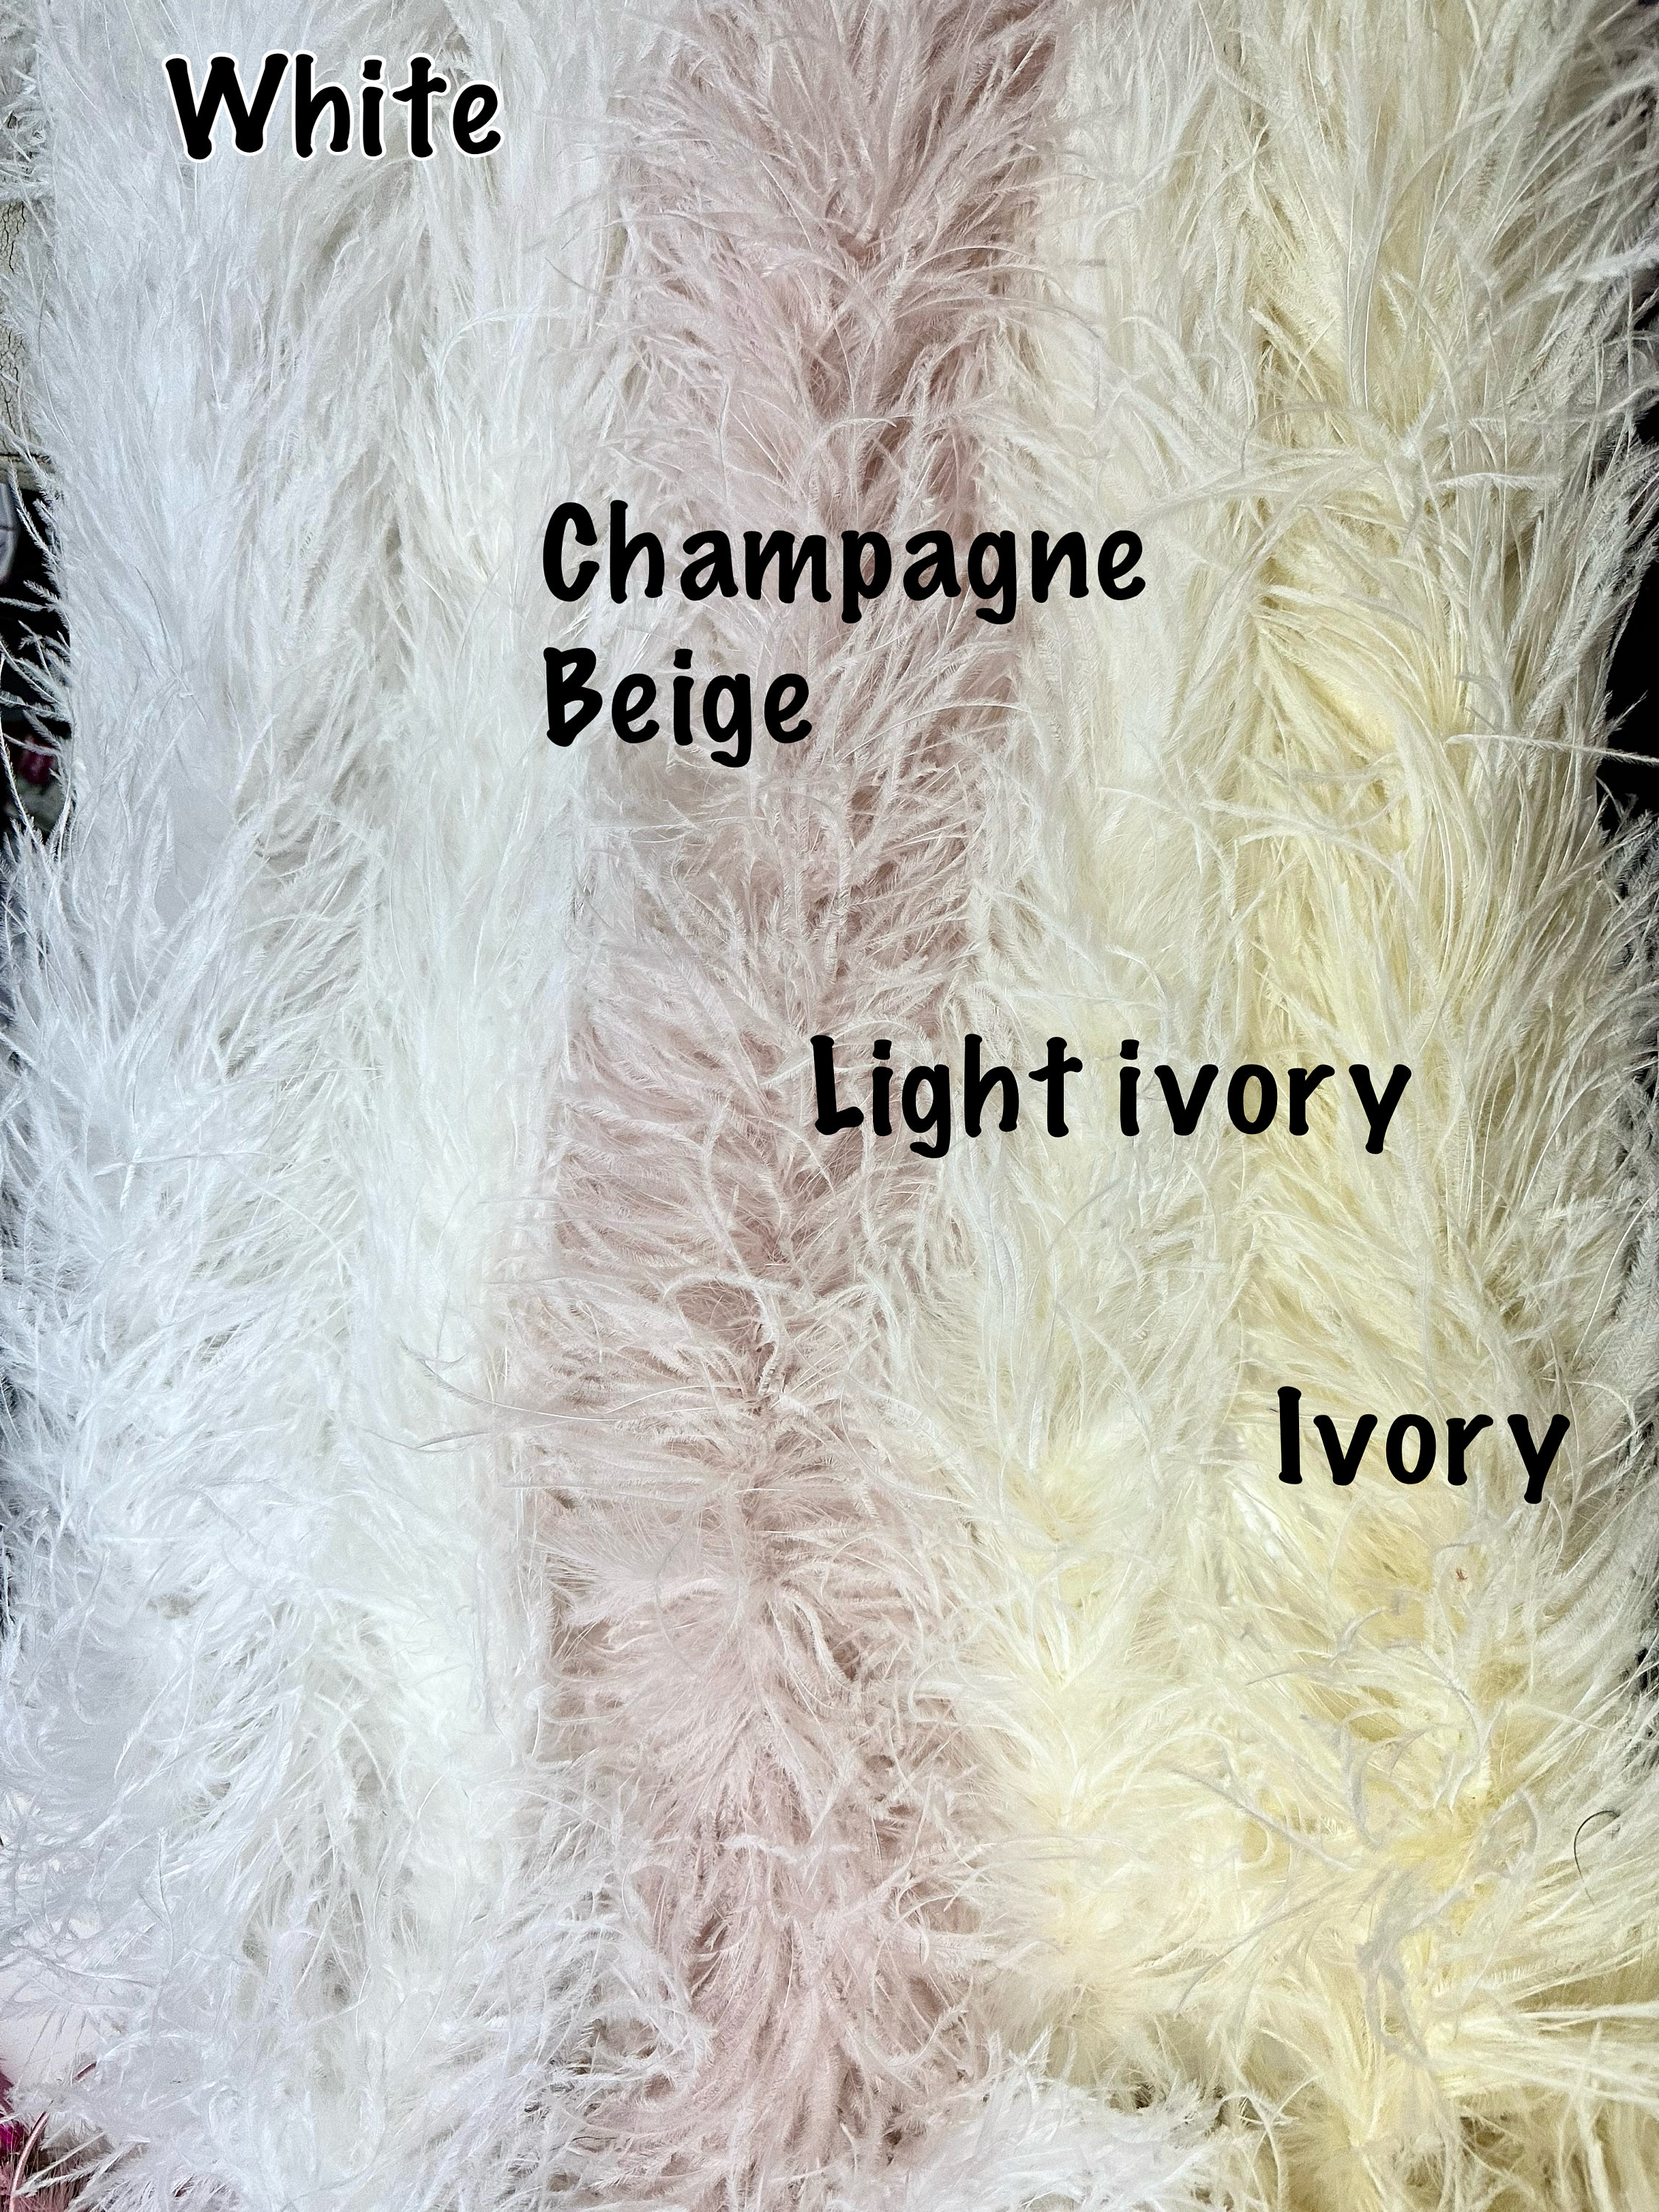 Ostrich Feather Trim, Add on Feather for Cuffs, Shoes, Ostrich feather  Wrist Band Feather Shoe Clips, Feather Trim All Colors/ Ply's